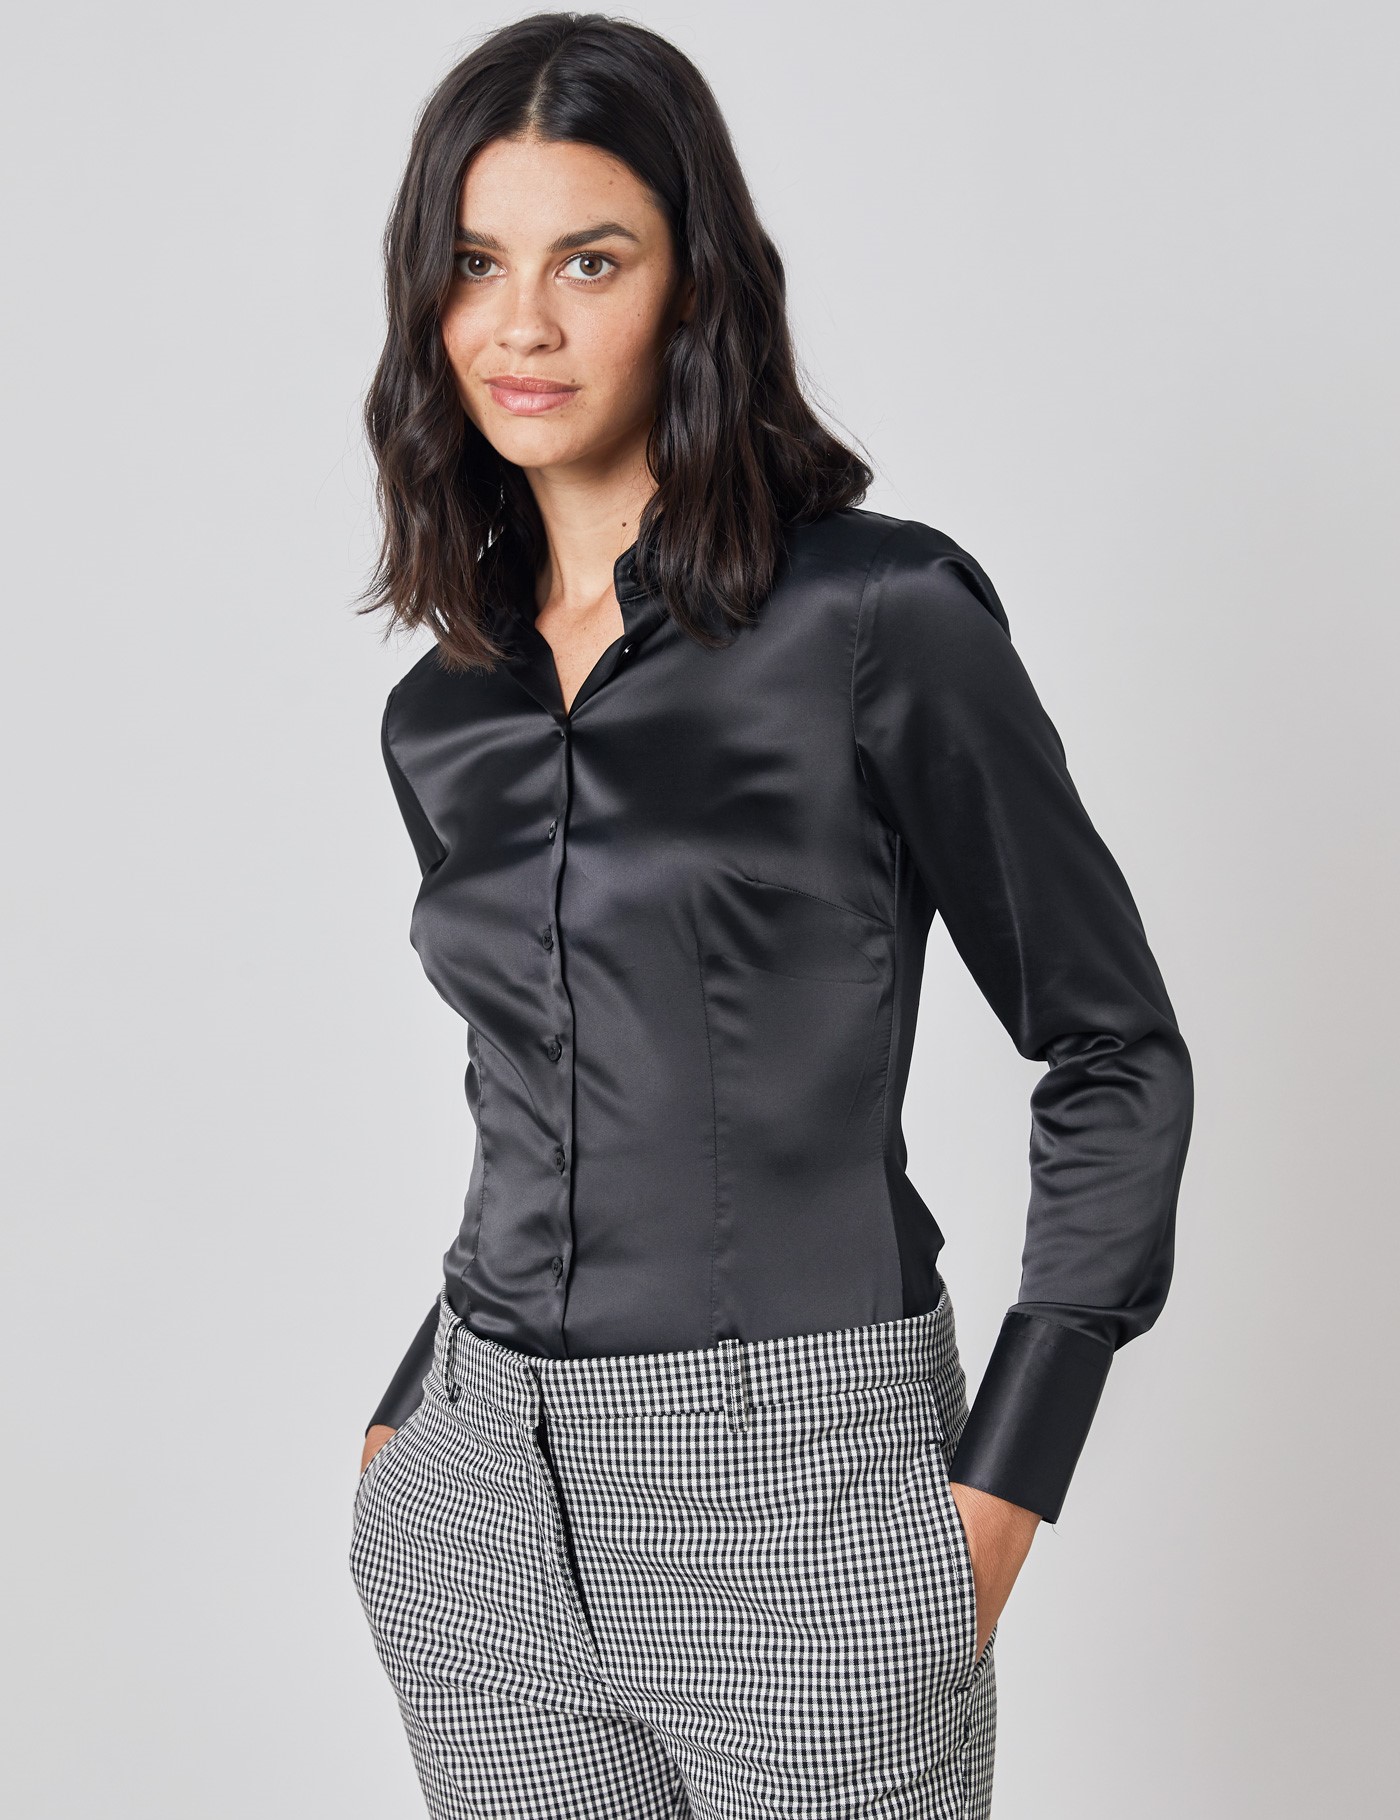 Satin Women S Fitted Shirt With Single Cuff In Black Hawes And Curtis Uk